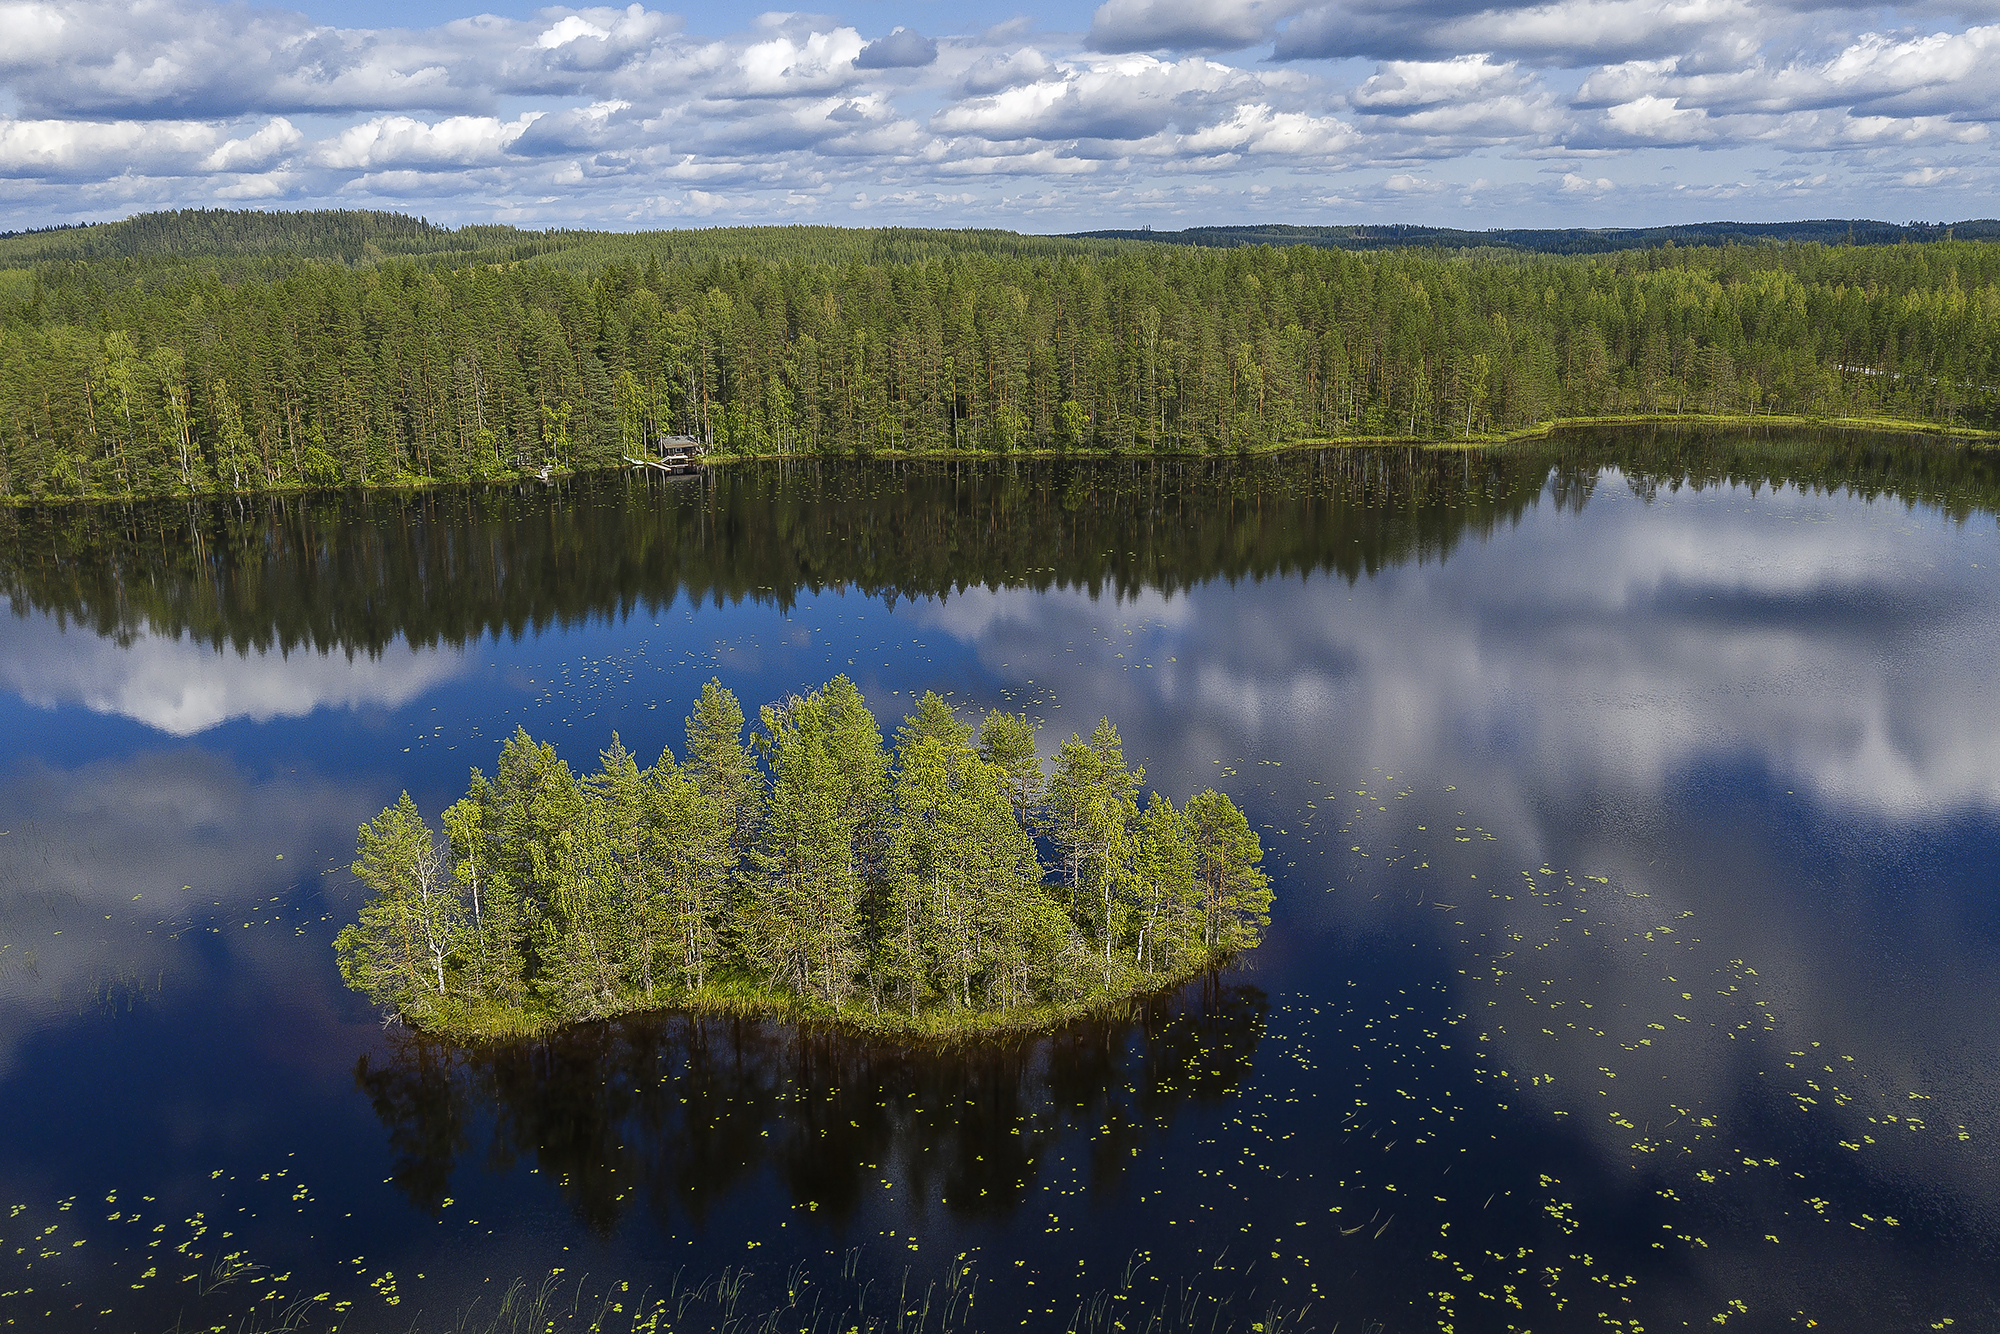 Research: Finns are proud of nature and landscapes